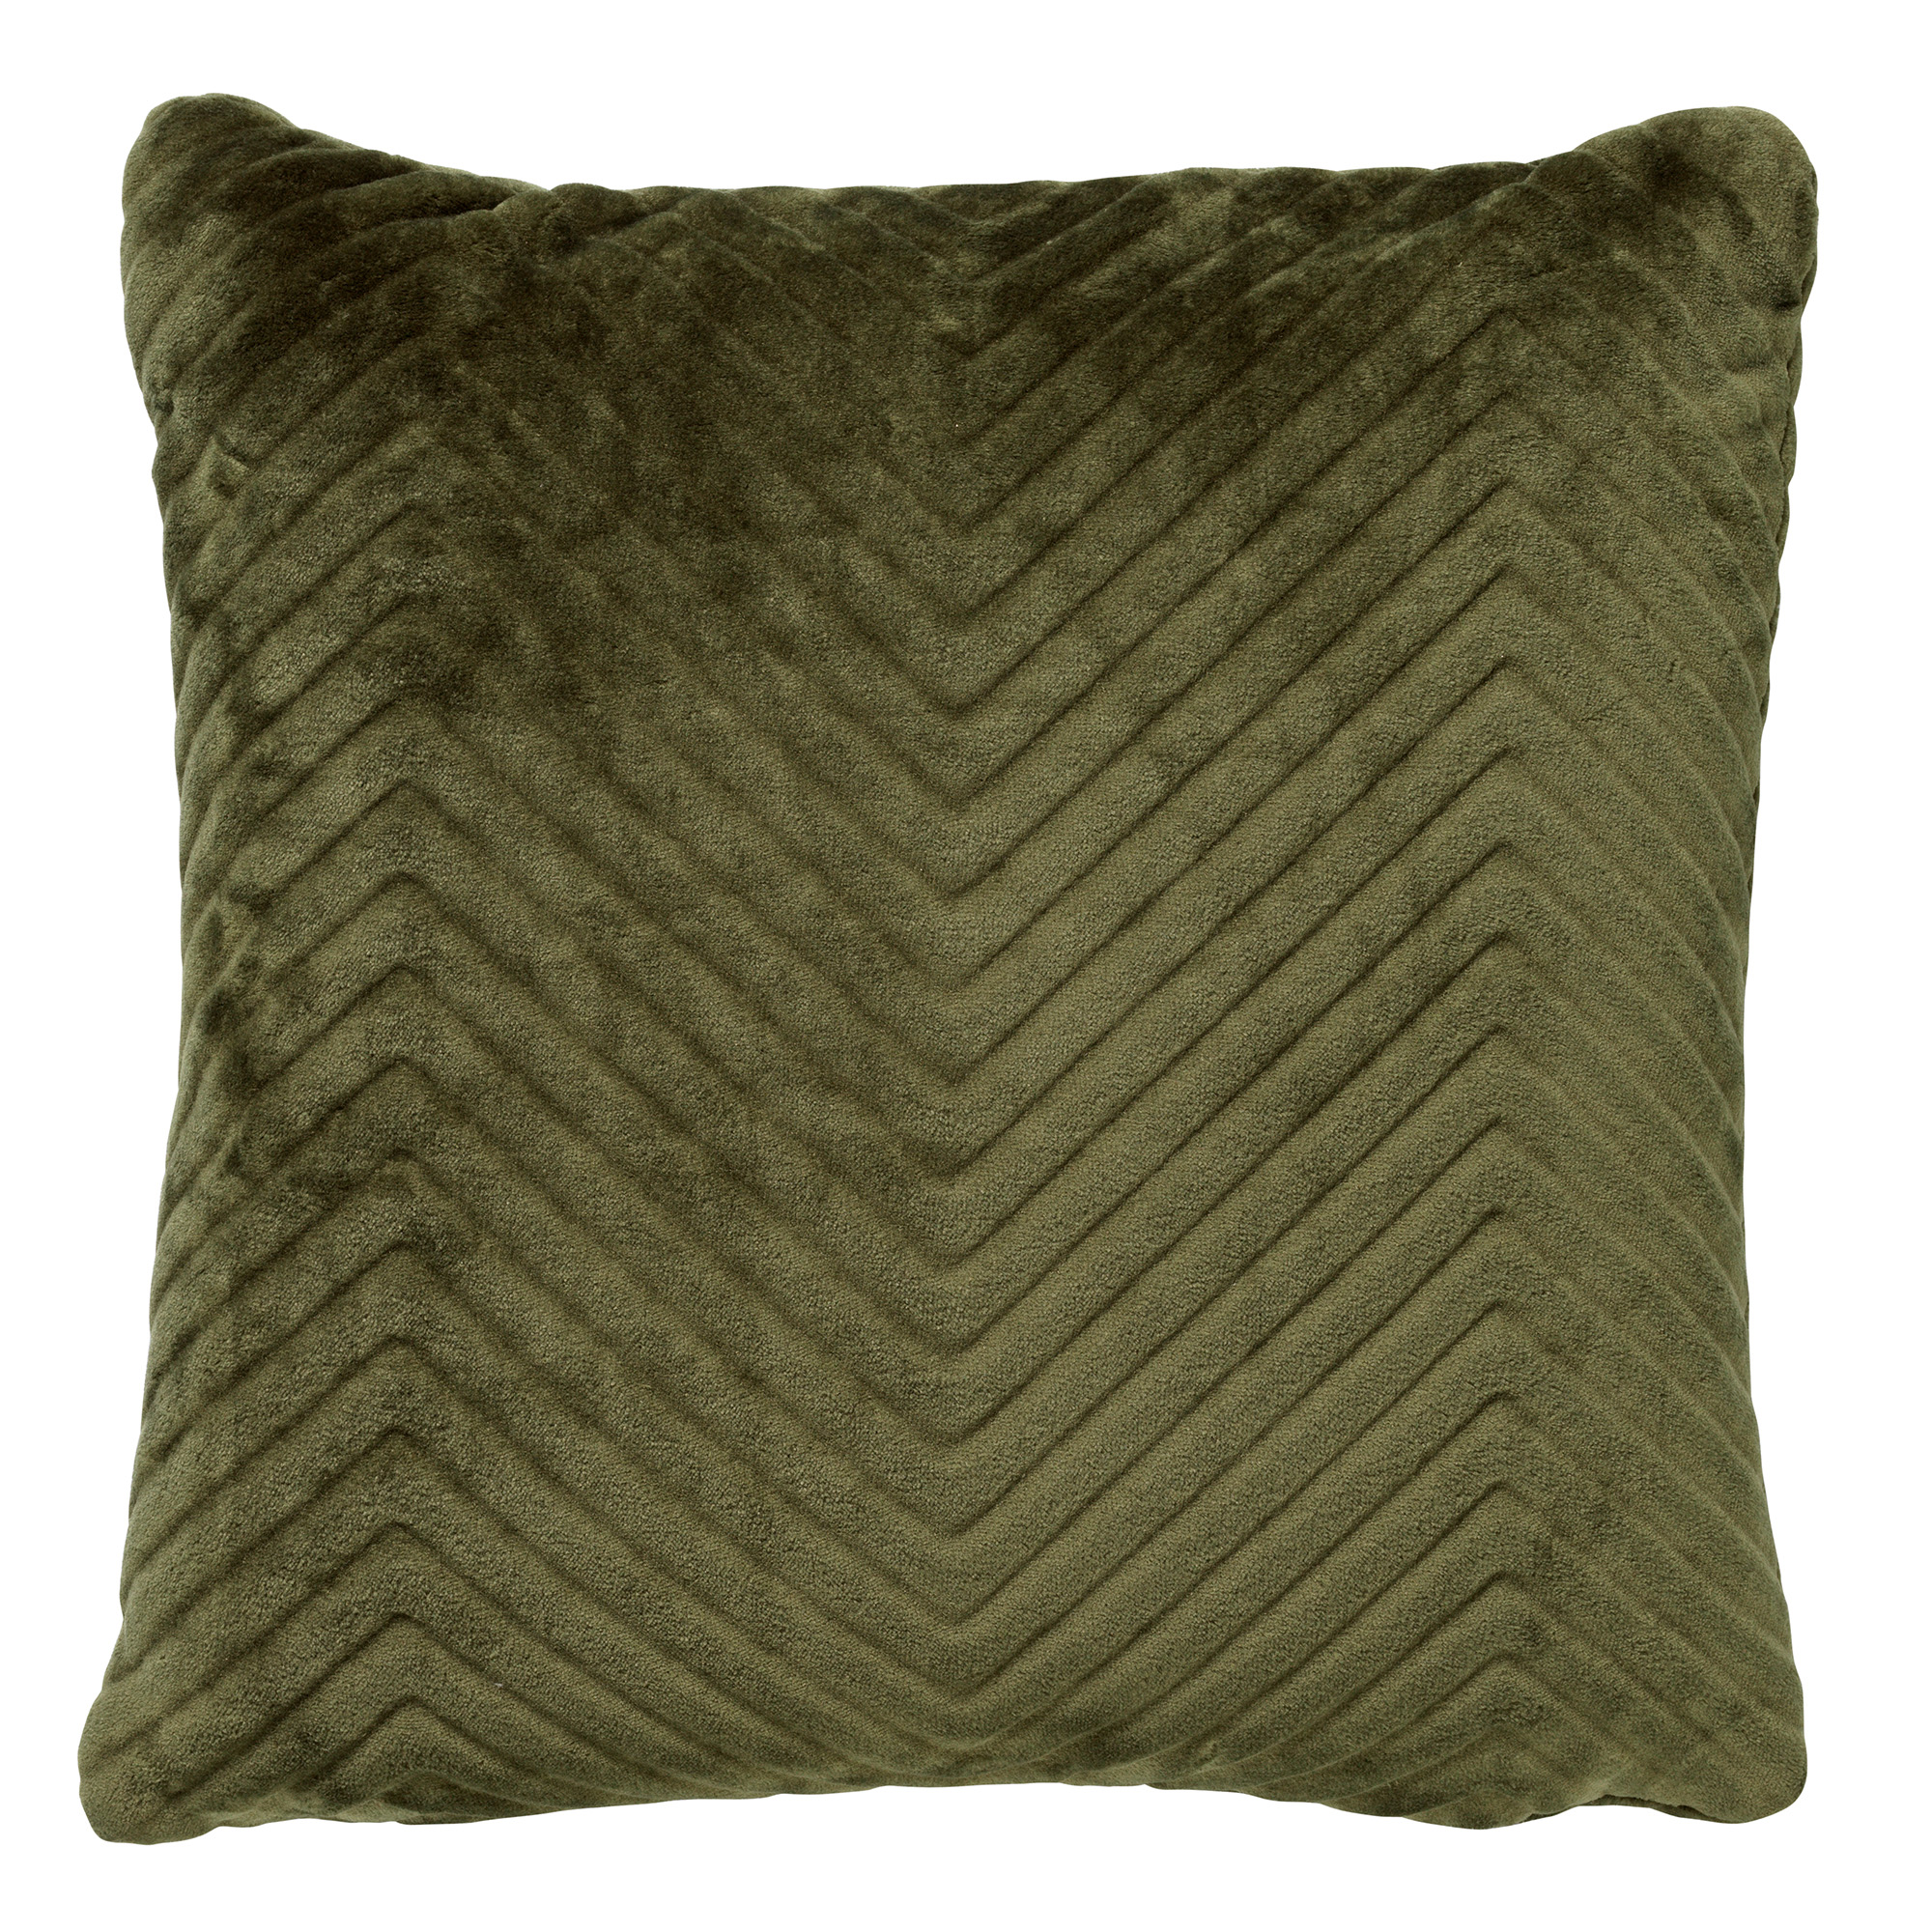 ZICO - Cushion with pattern 45x45 cm Chive